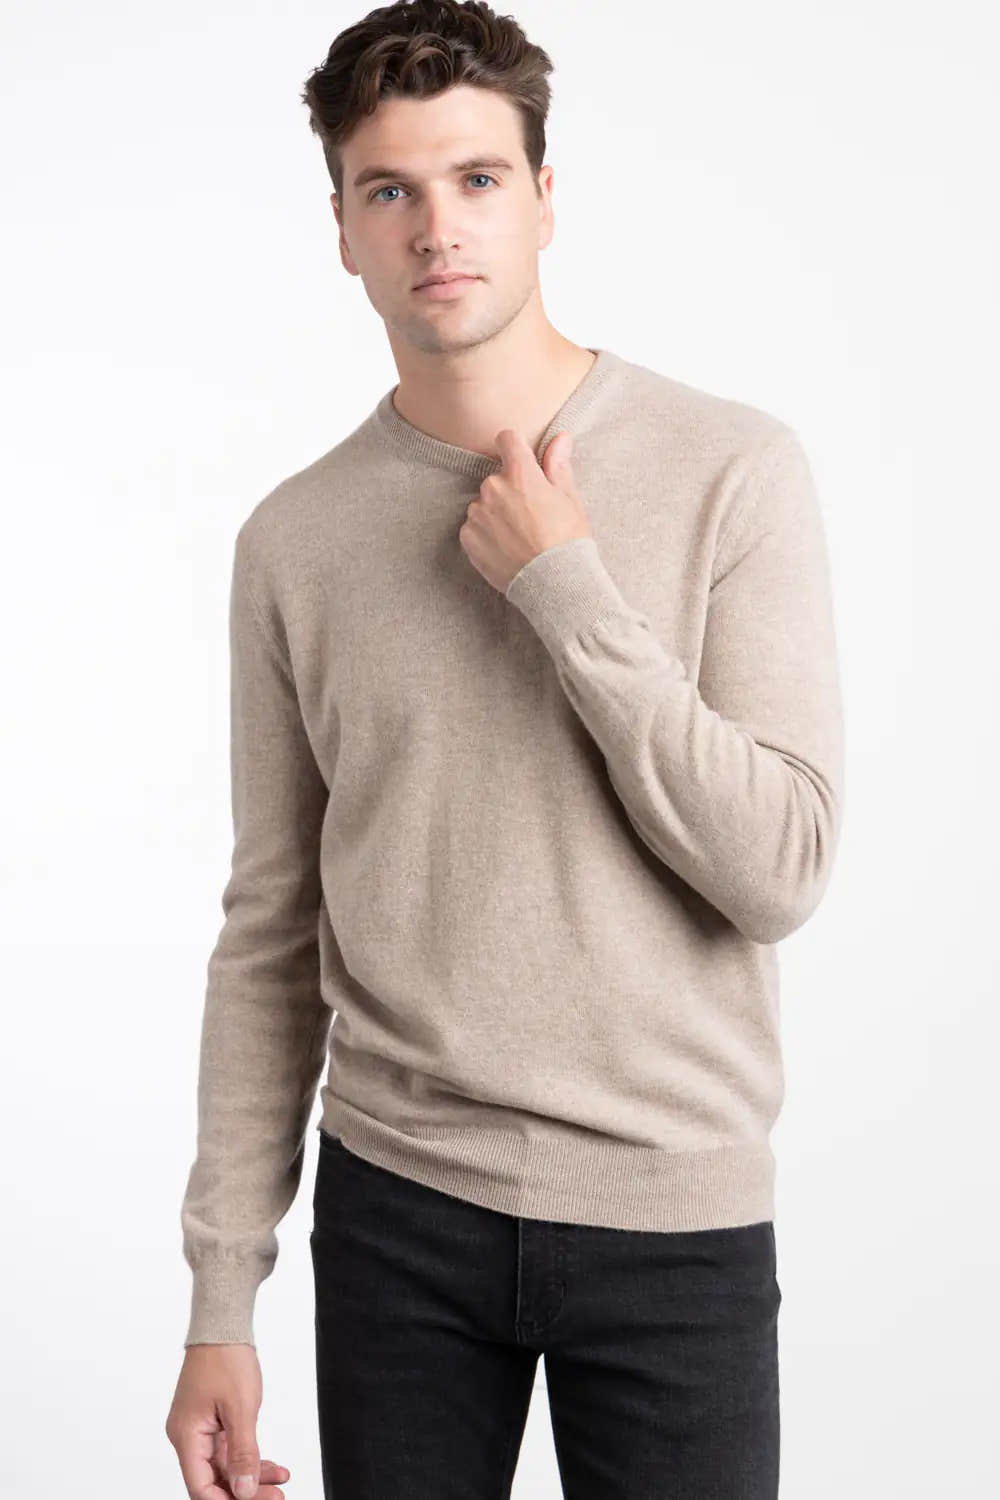 Oat coloured ZEGNA Oasi Cashmere Crewneck Sweater being worn by a white man with brown hair against a white background